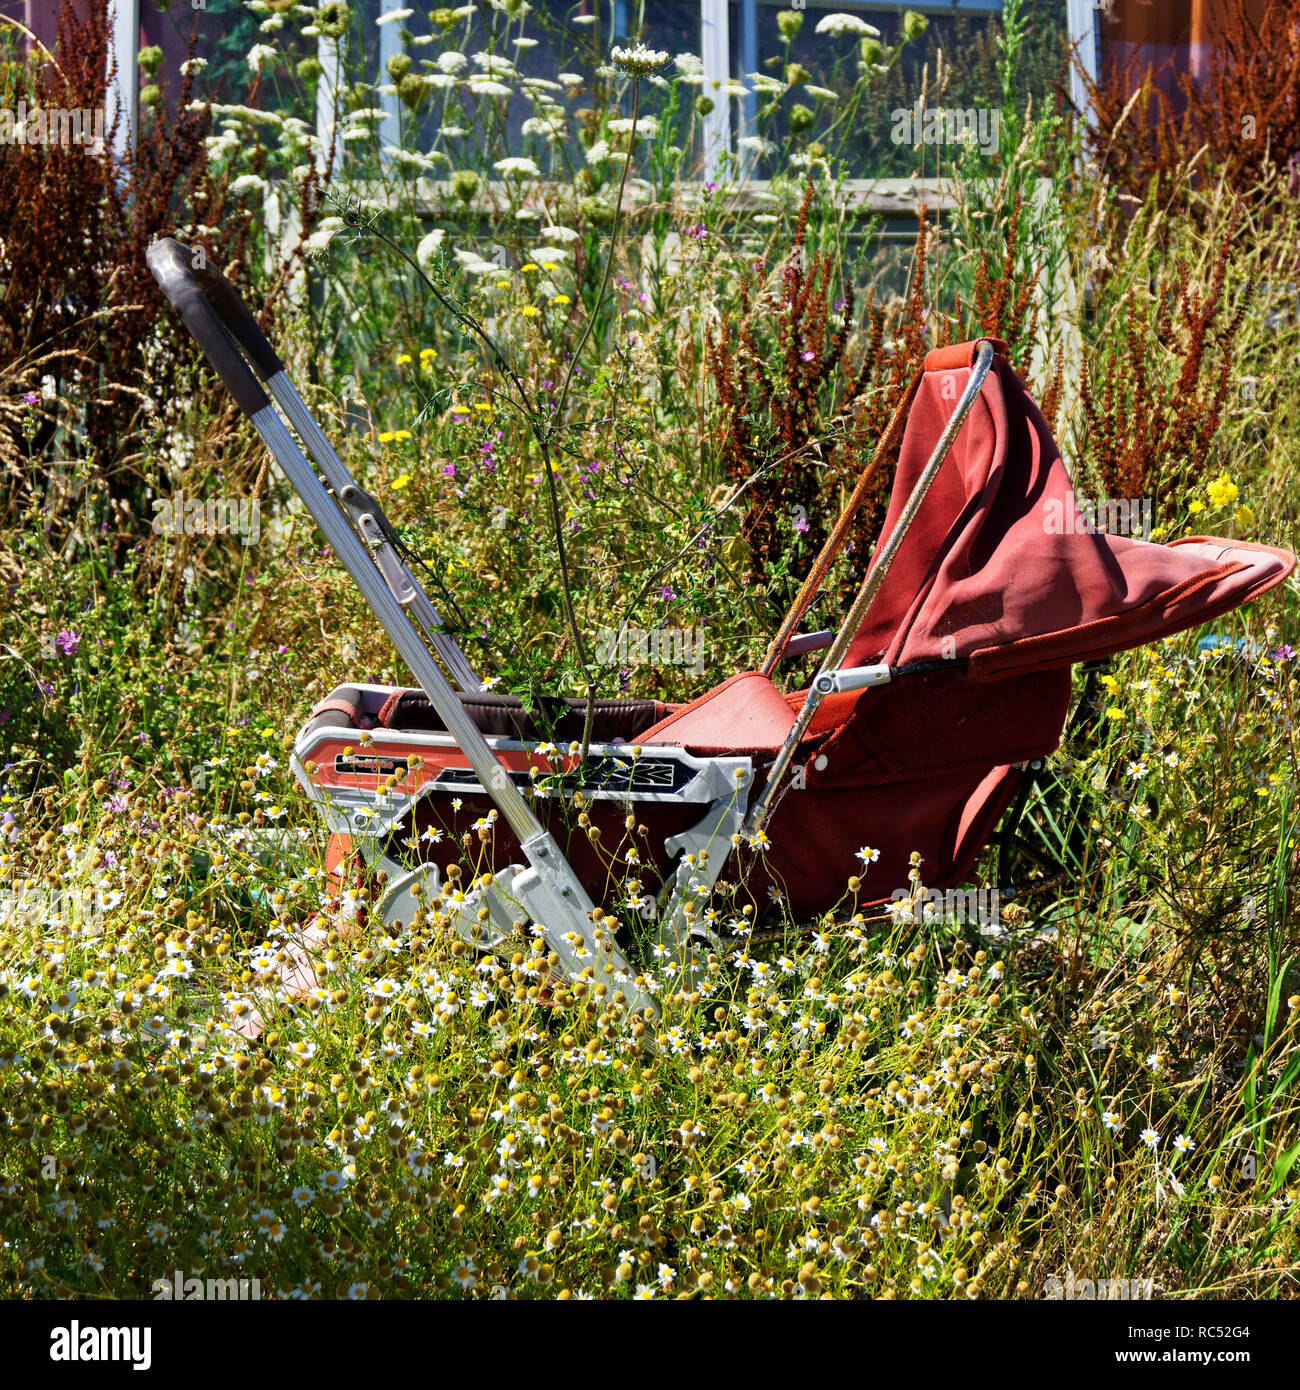 The kids have grown up so throw the pram away. Pram dumped or abandoned on waste ground. Stock Photo